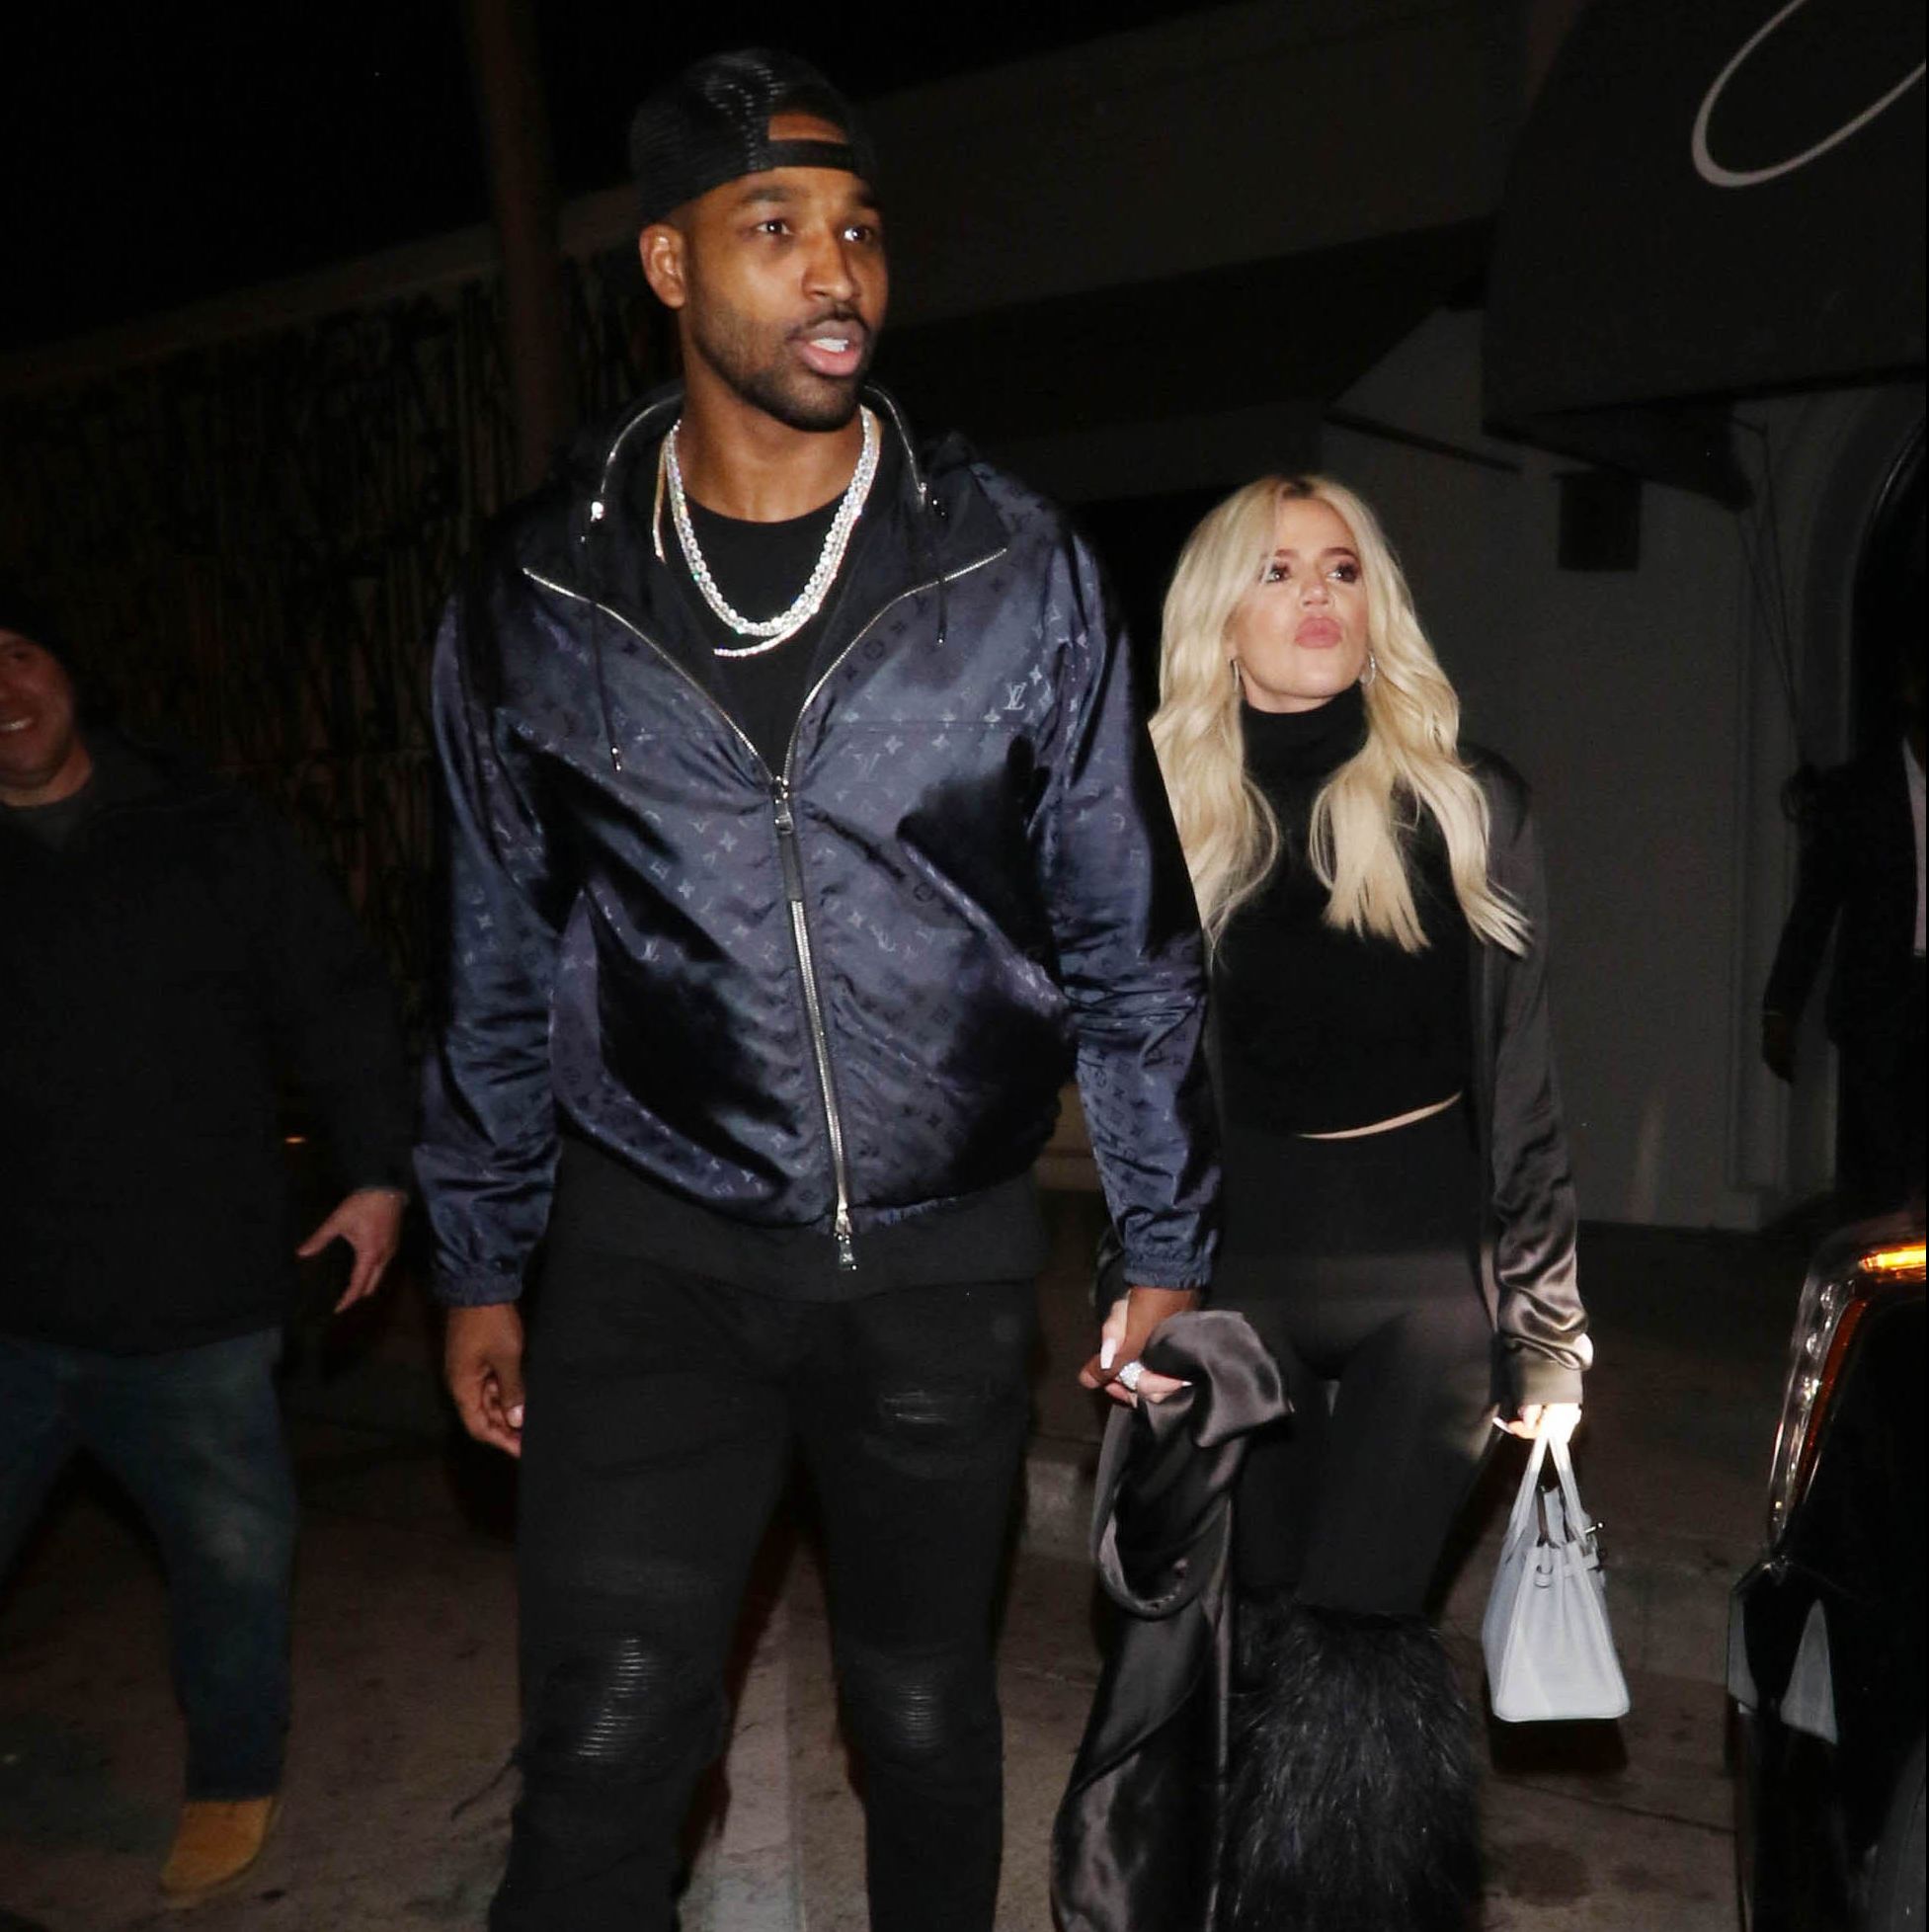 Yes, Khloé Kardashian and Tristan Thompson Planned Second Pregnancy Before Their Breakup